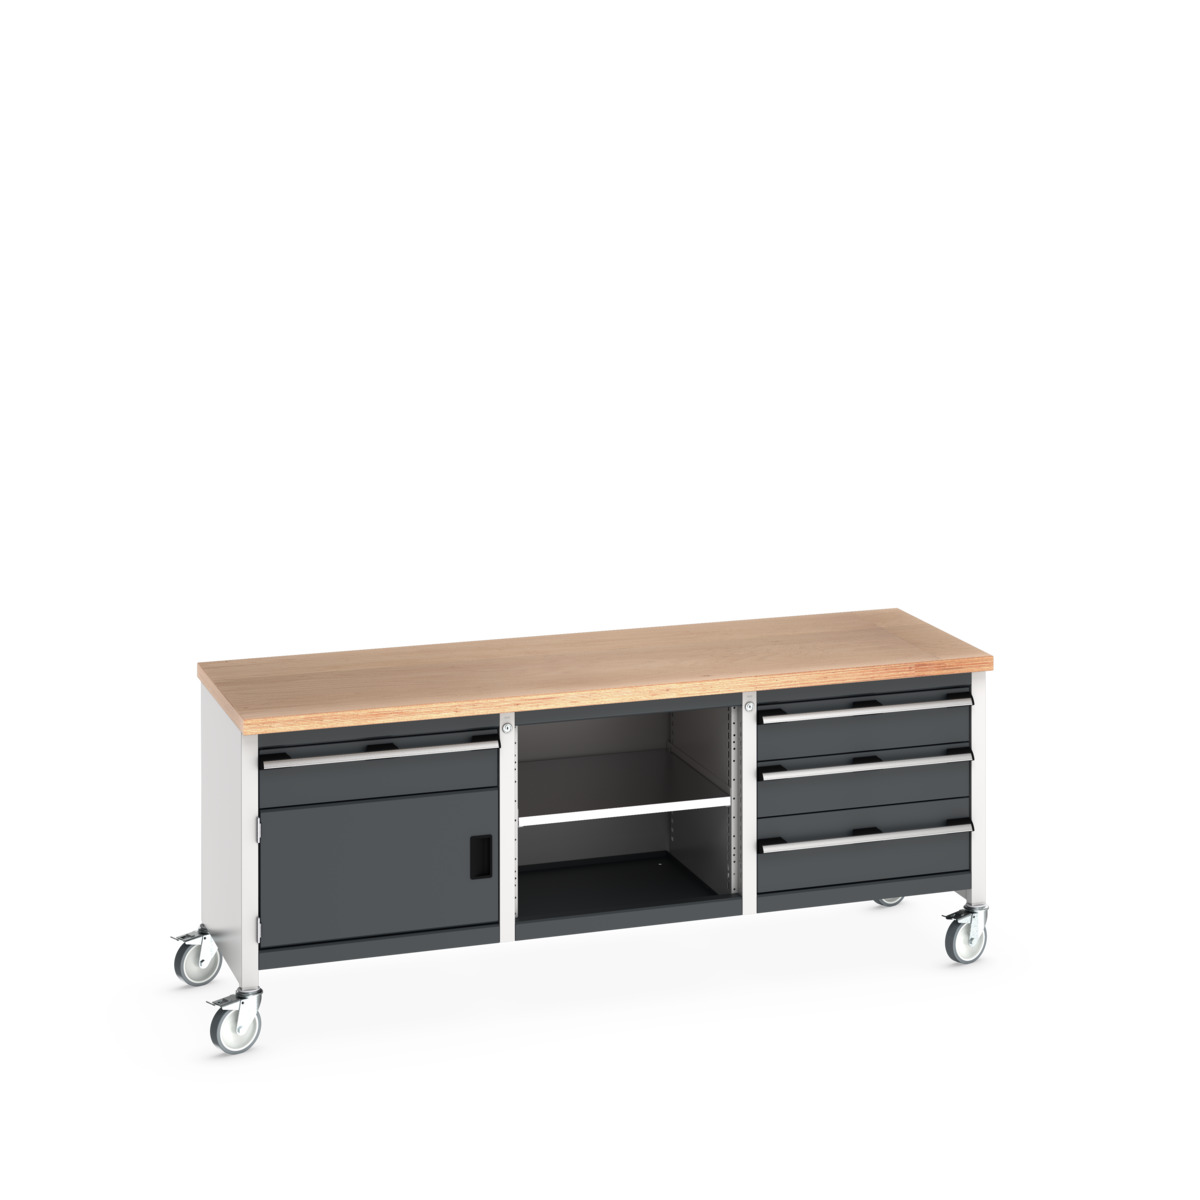 41002127.19V - cubio mobile storage bench (mpx)